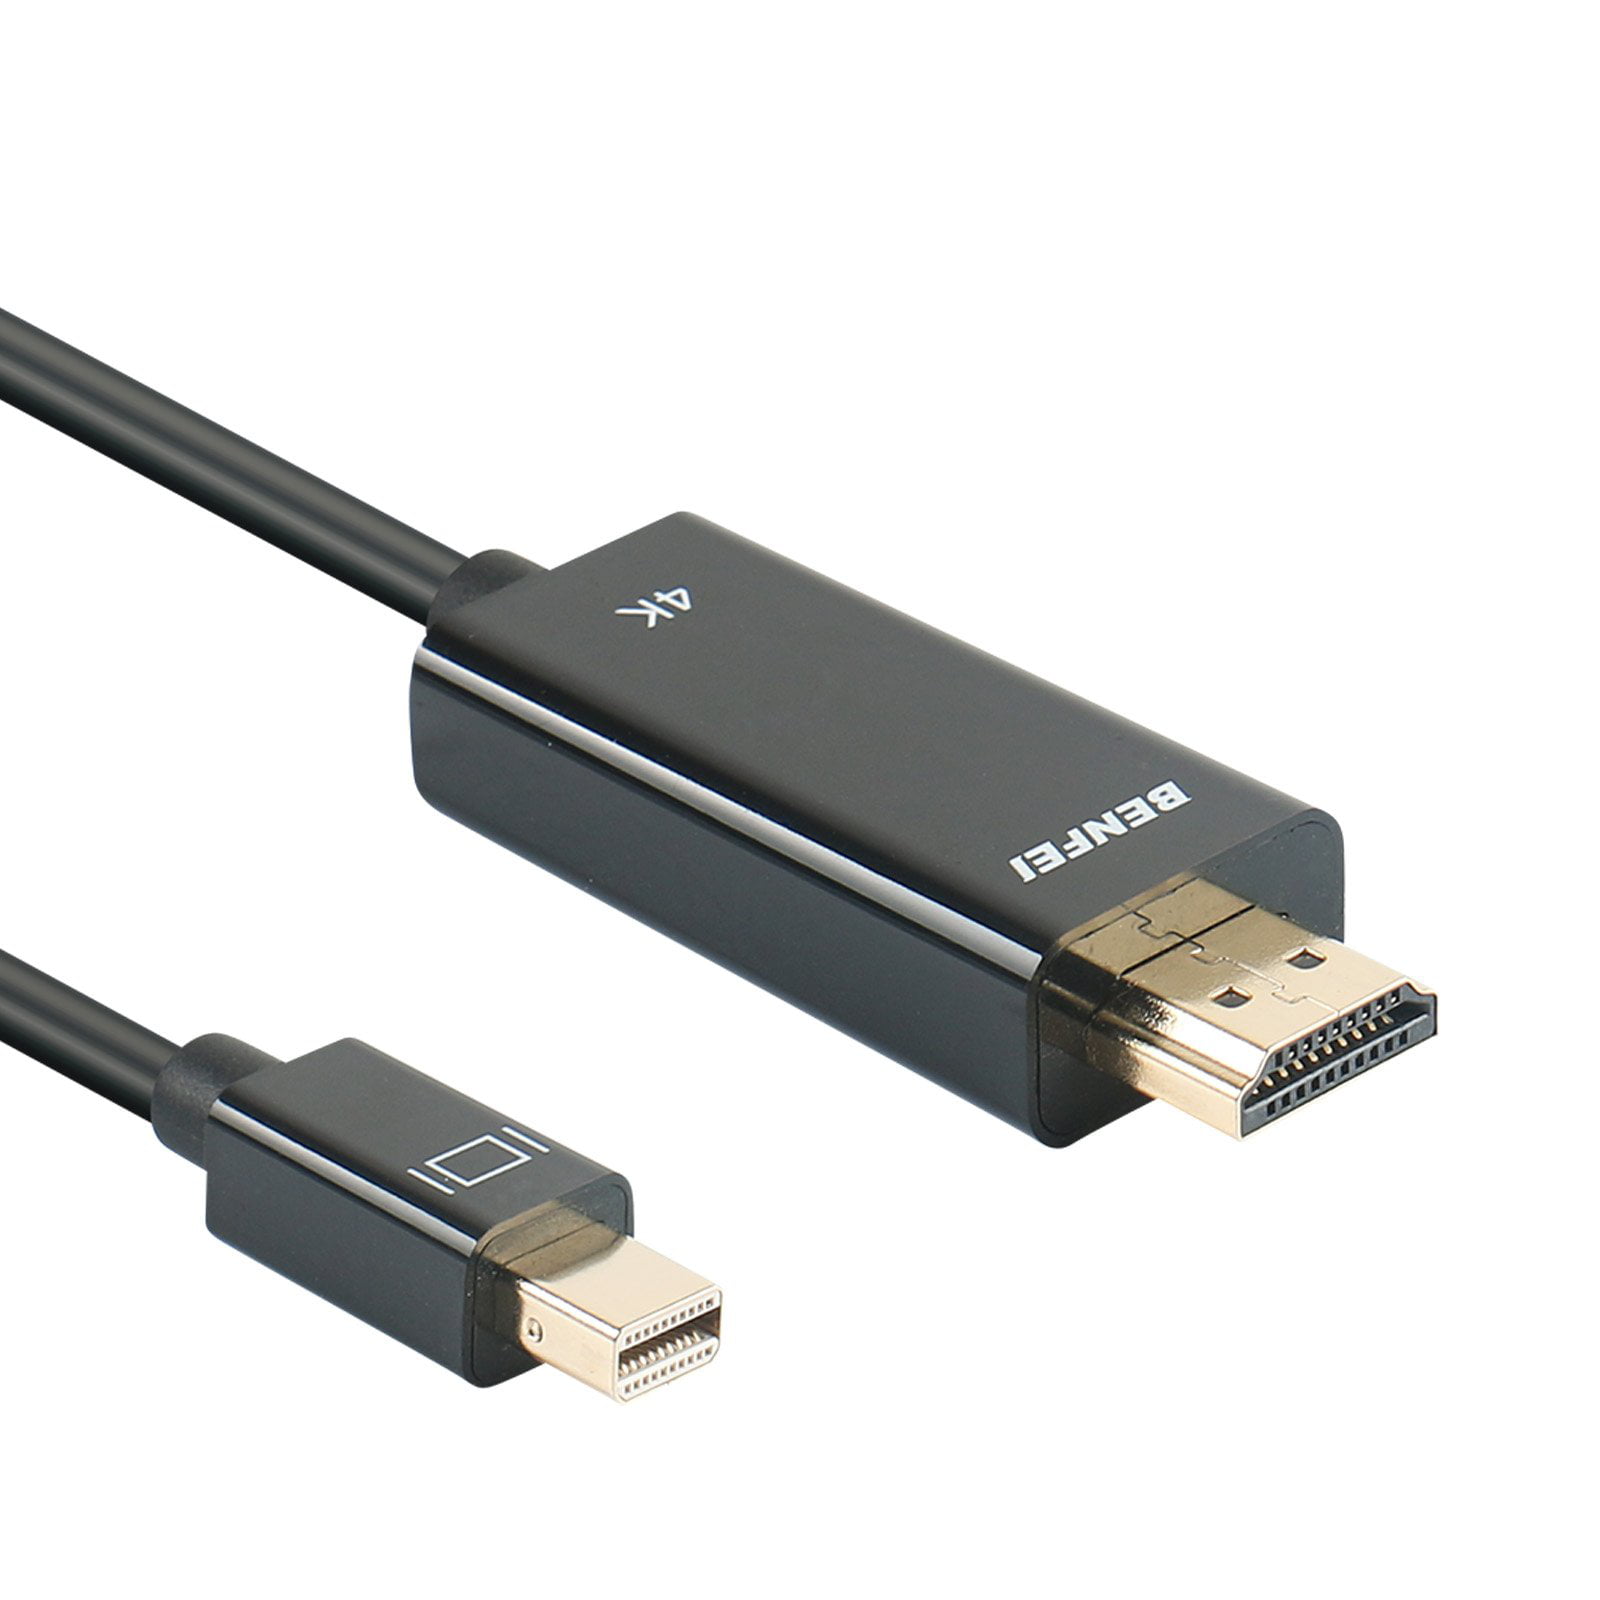 BENFEI 1.8 Meter DP to DP Cable,Supports 4K@60Hz 2K@144Hz Compatible for Lenovo Dell DisplayPort to DisplayPort Cable Gold-Plated Connectors, Aluminium Shell&Nylon Cable ASUS and More HP